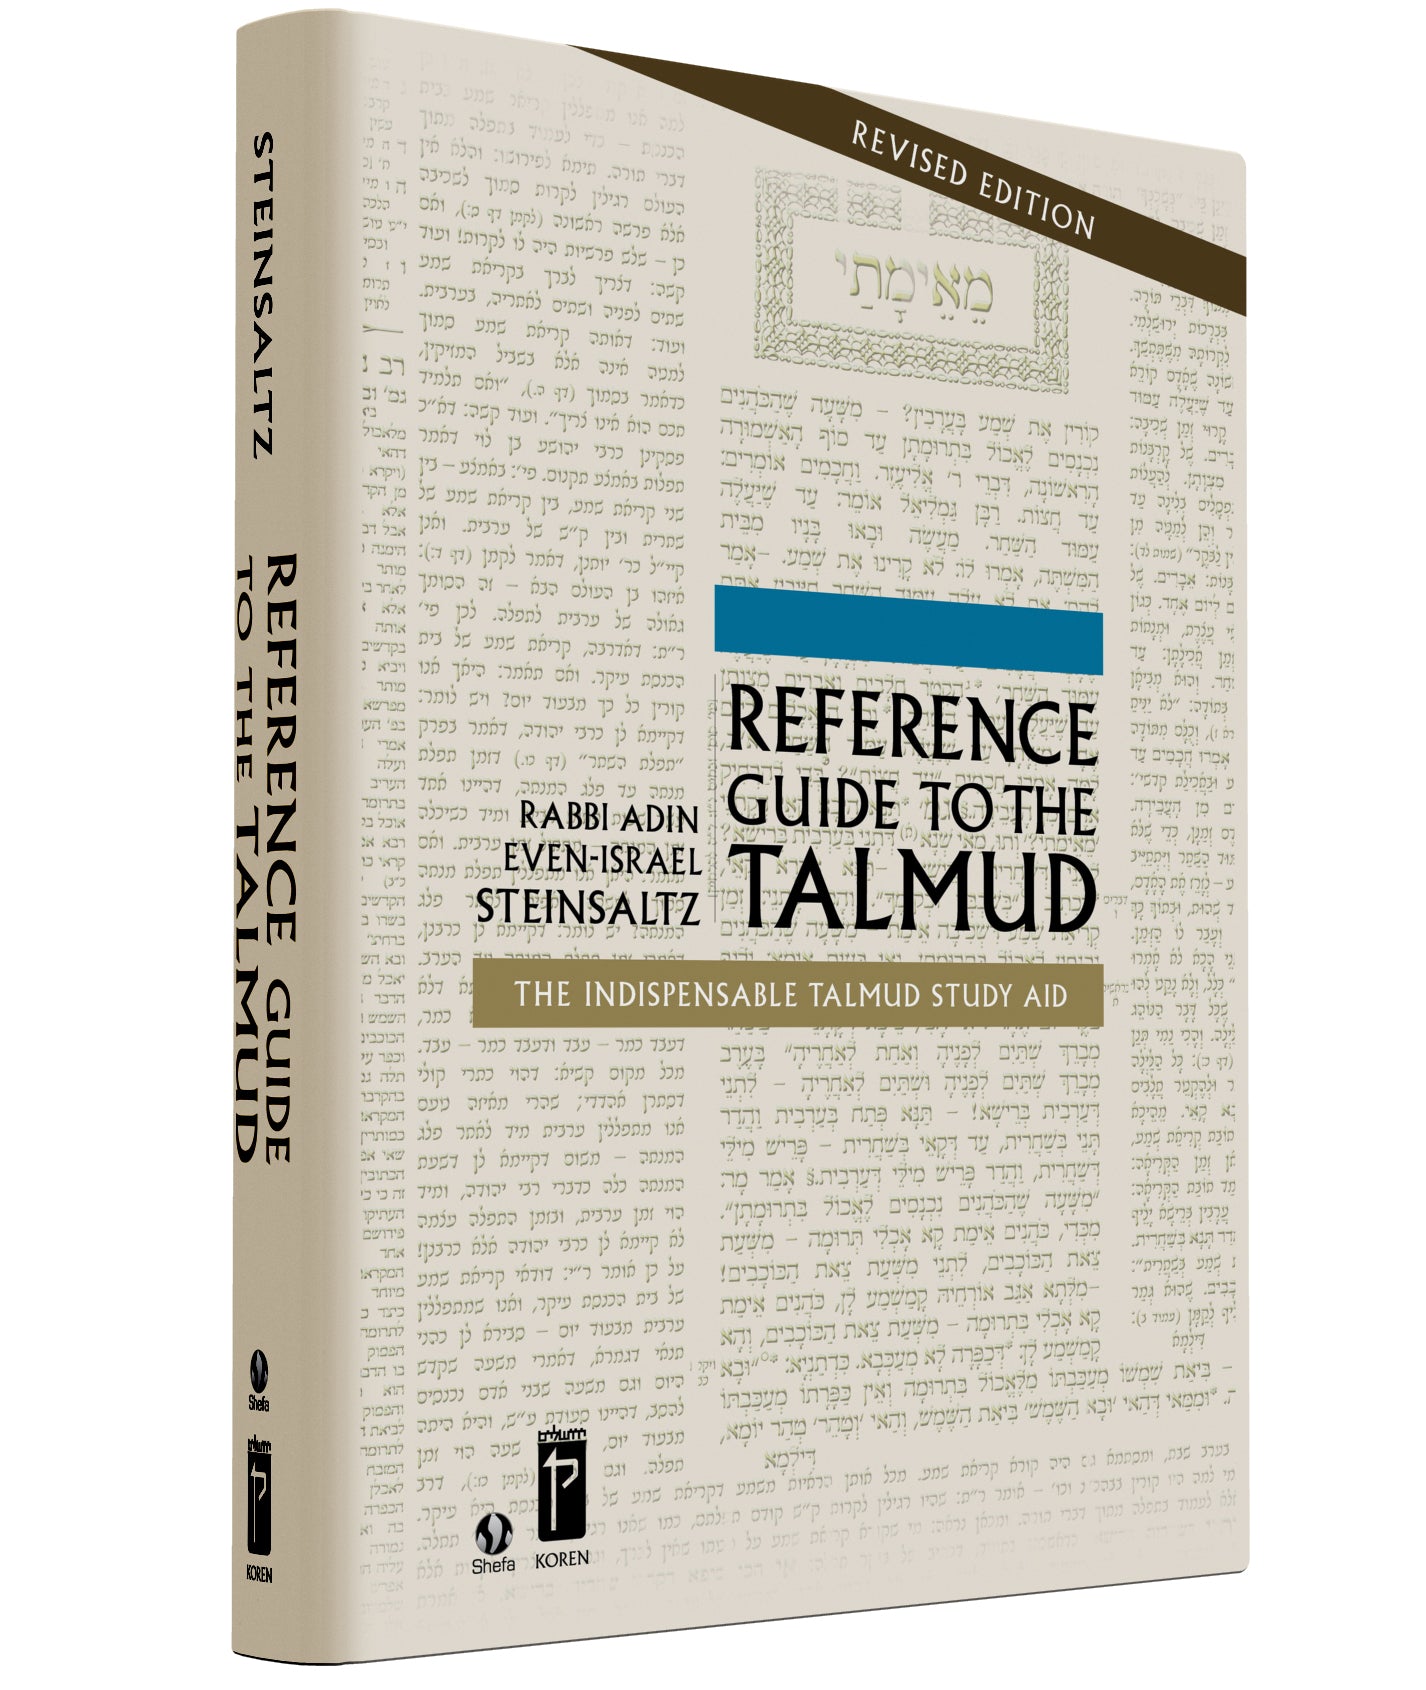 Reference Guide to the Talmud : Rabbi Adin Steinsaltz